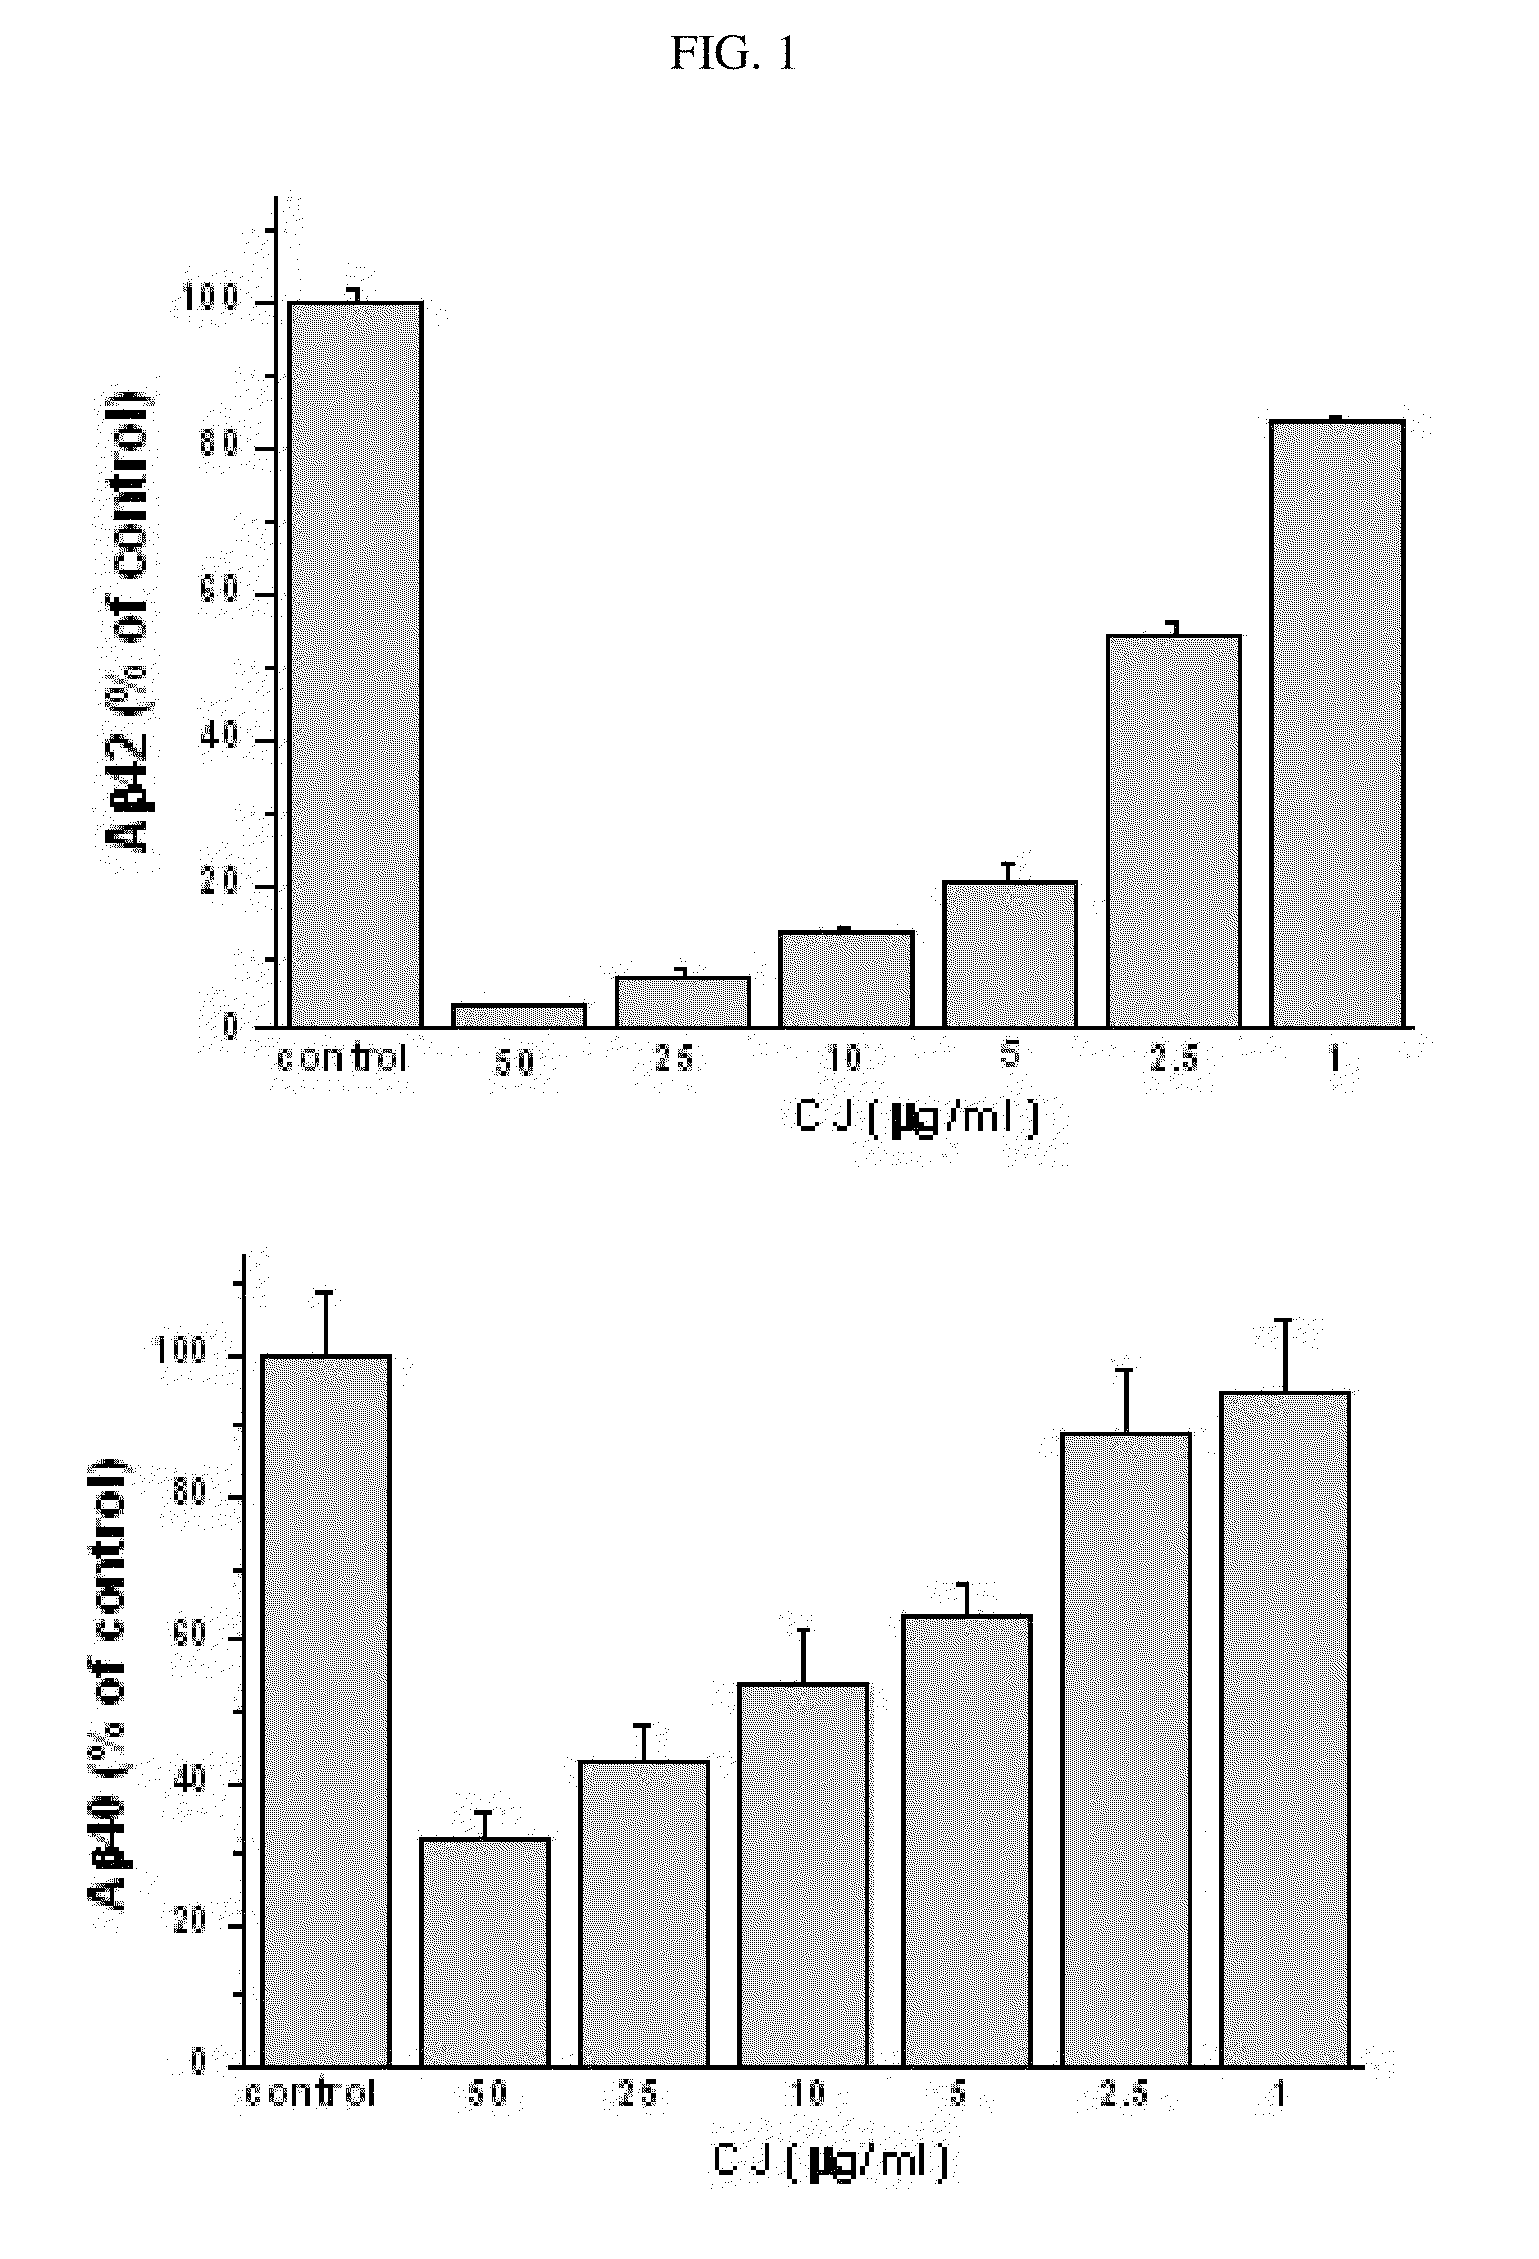 Method of preventing and/or treating a neurodegenerative disease by administering an extract of Lycoris chejuensis and/or a compound isolated therefrom